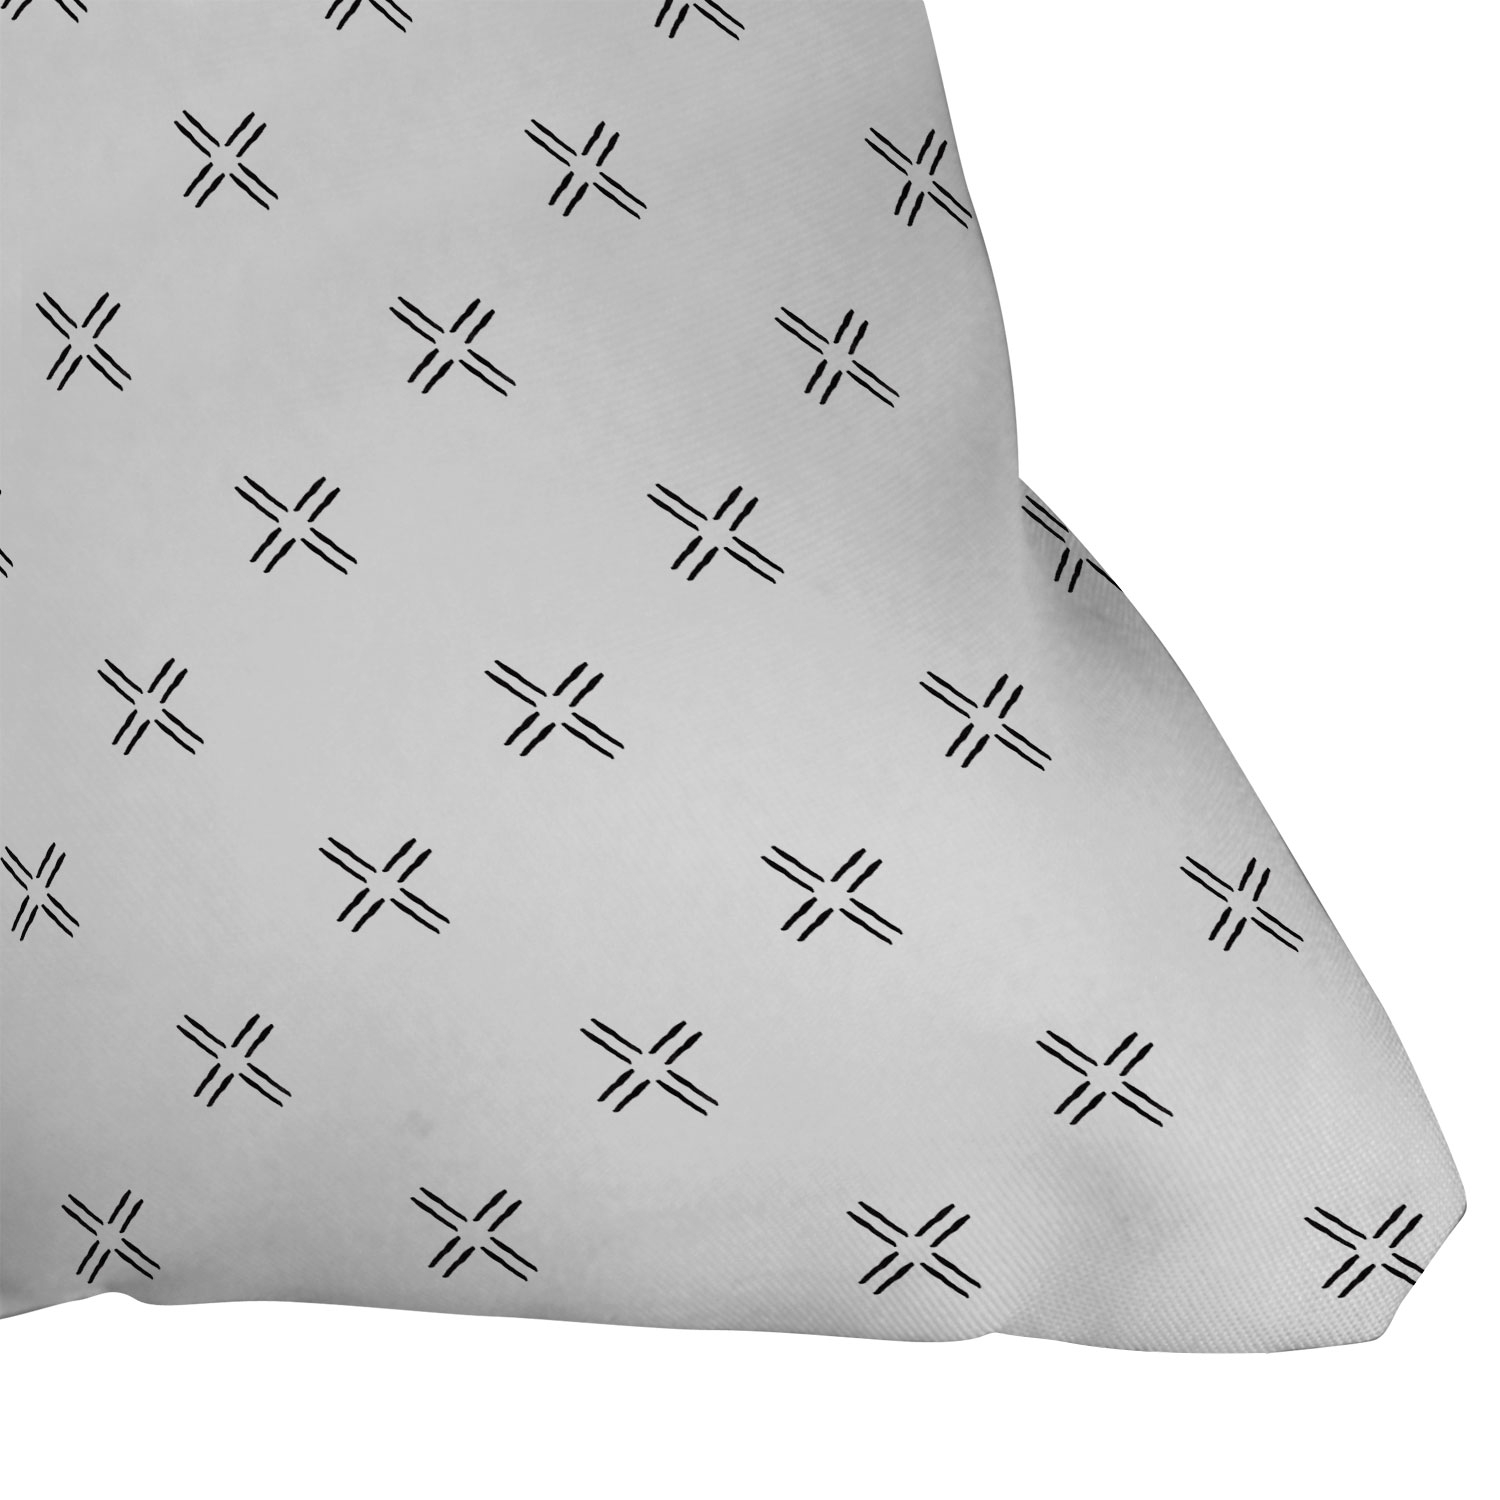 Mud Cloth Cross Black by Little Arrow Design Co - Outdoor Throw Pillow 16" x 16" - Image 2